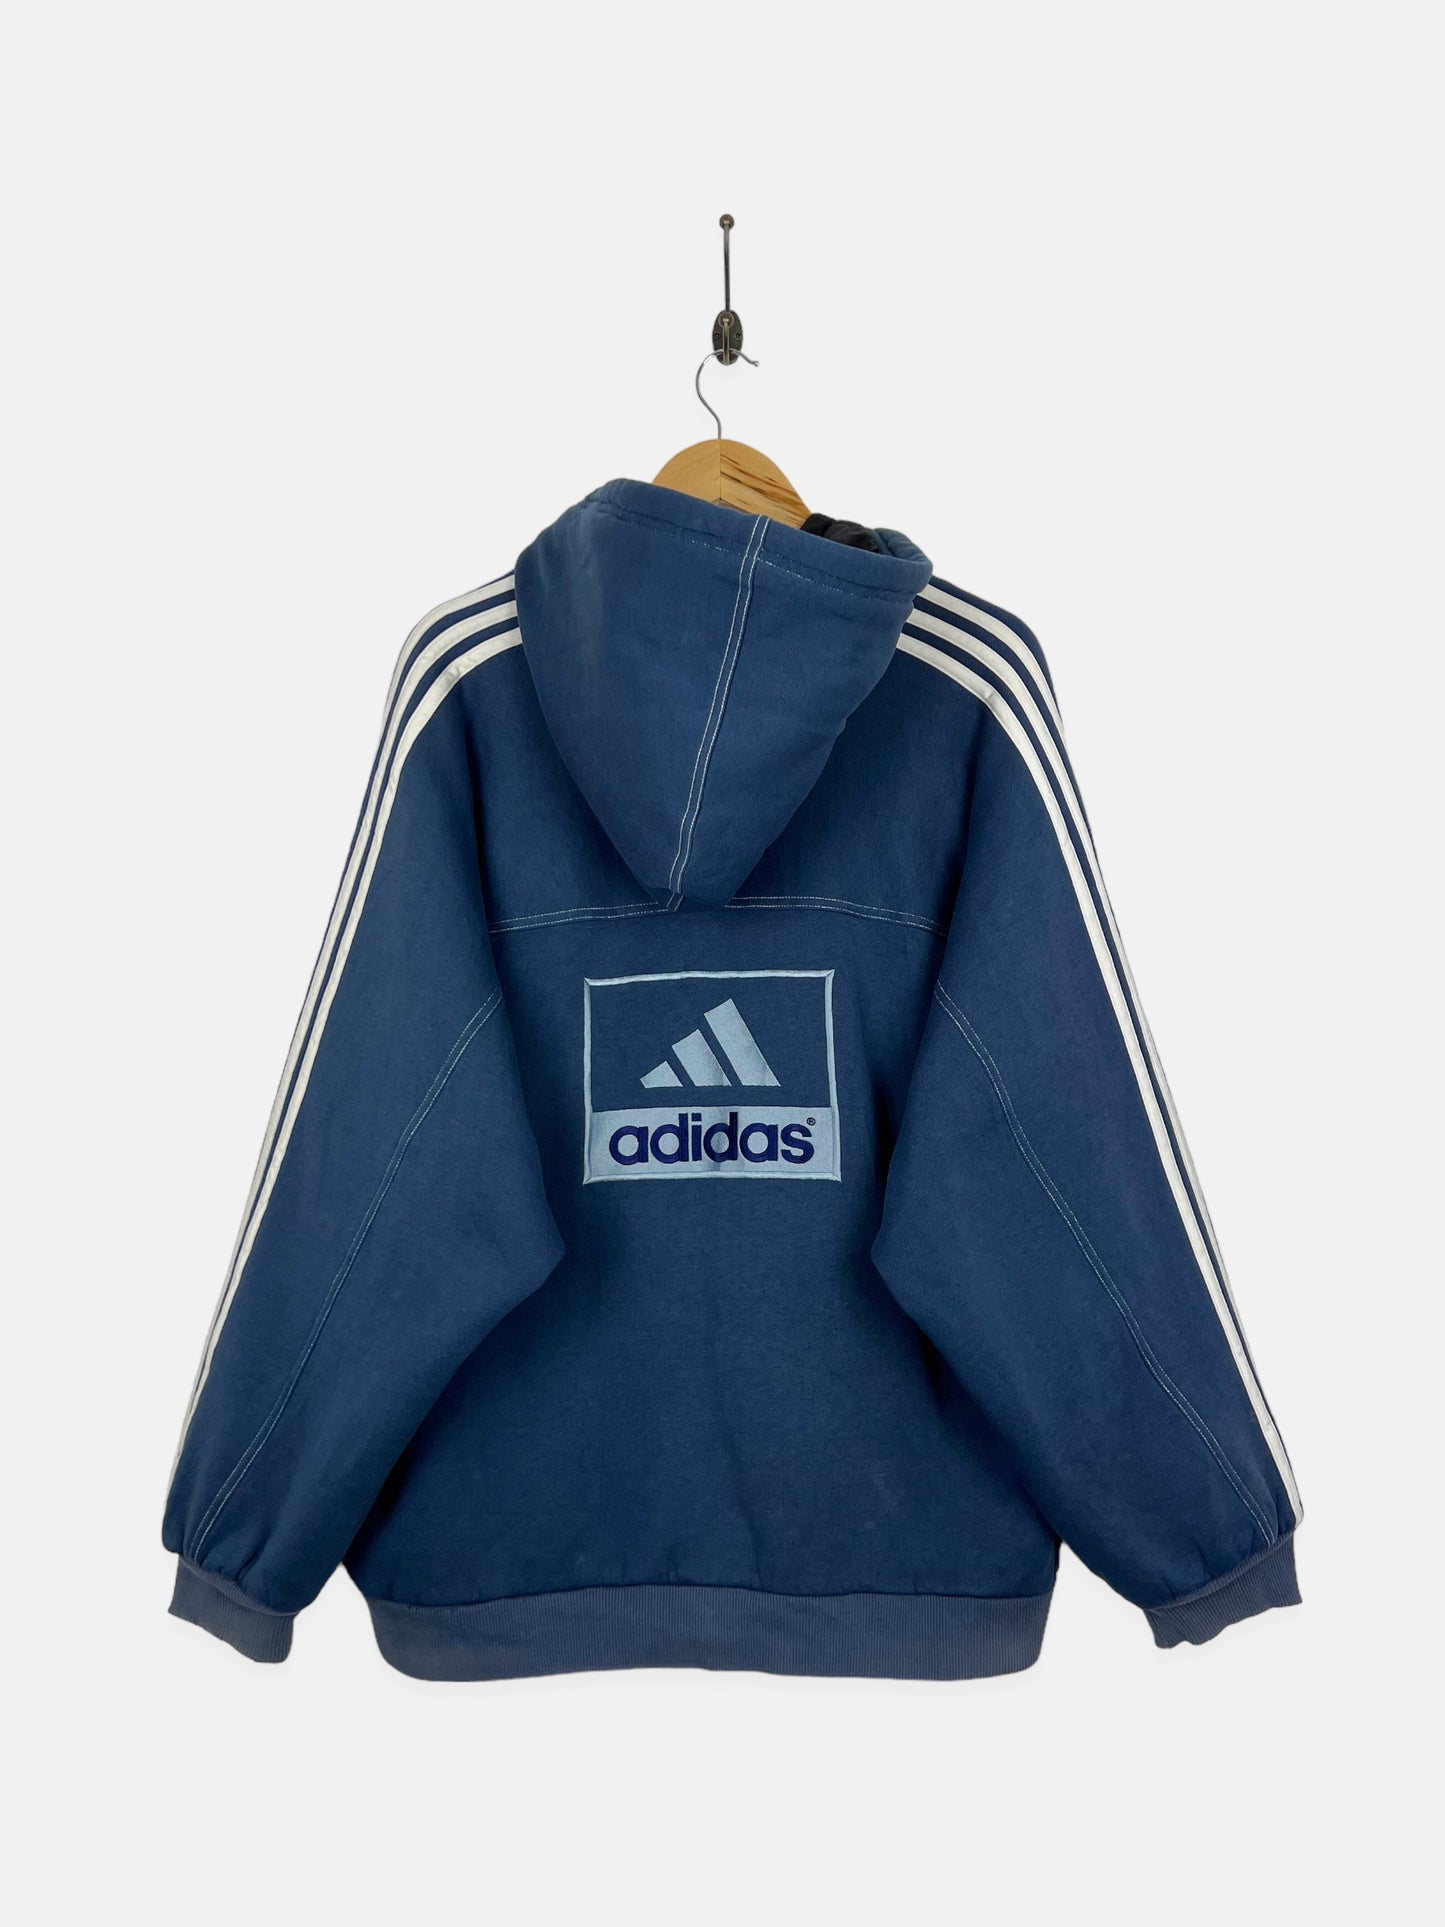 90's Adidas Embroidered Lined Jacket with Hood Size L